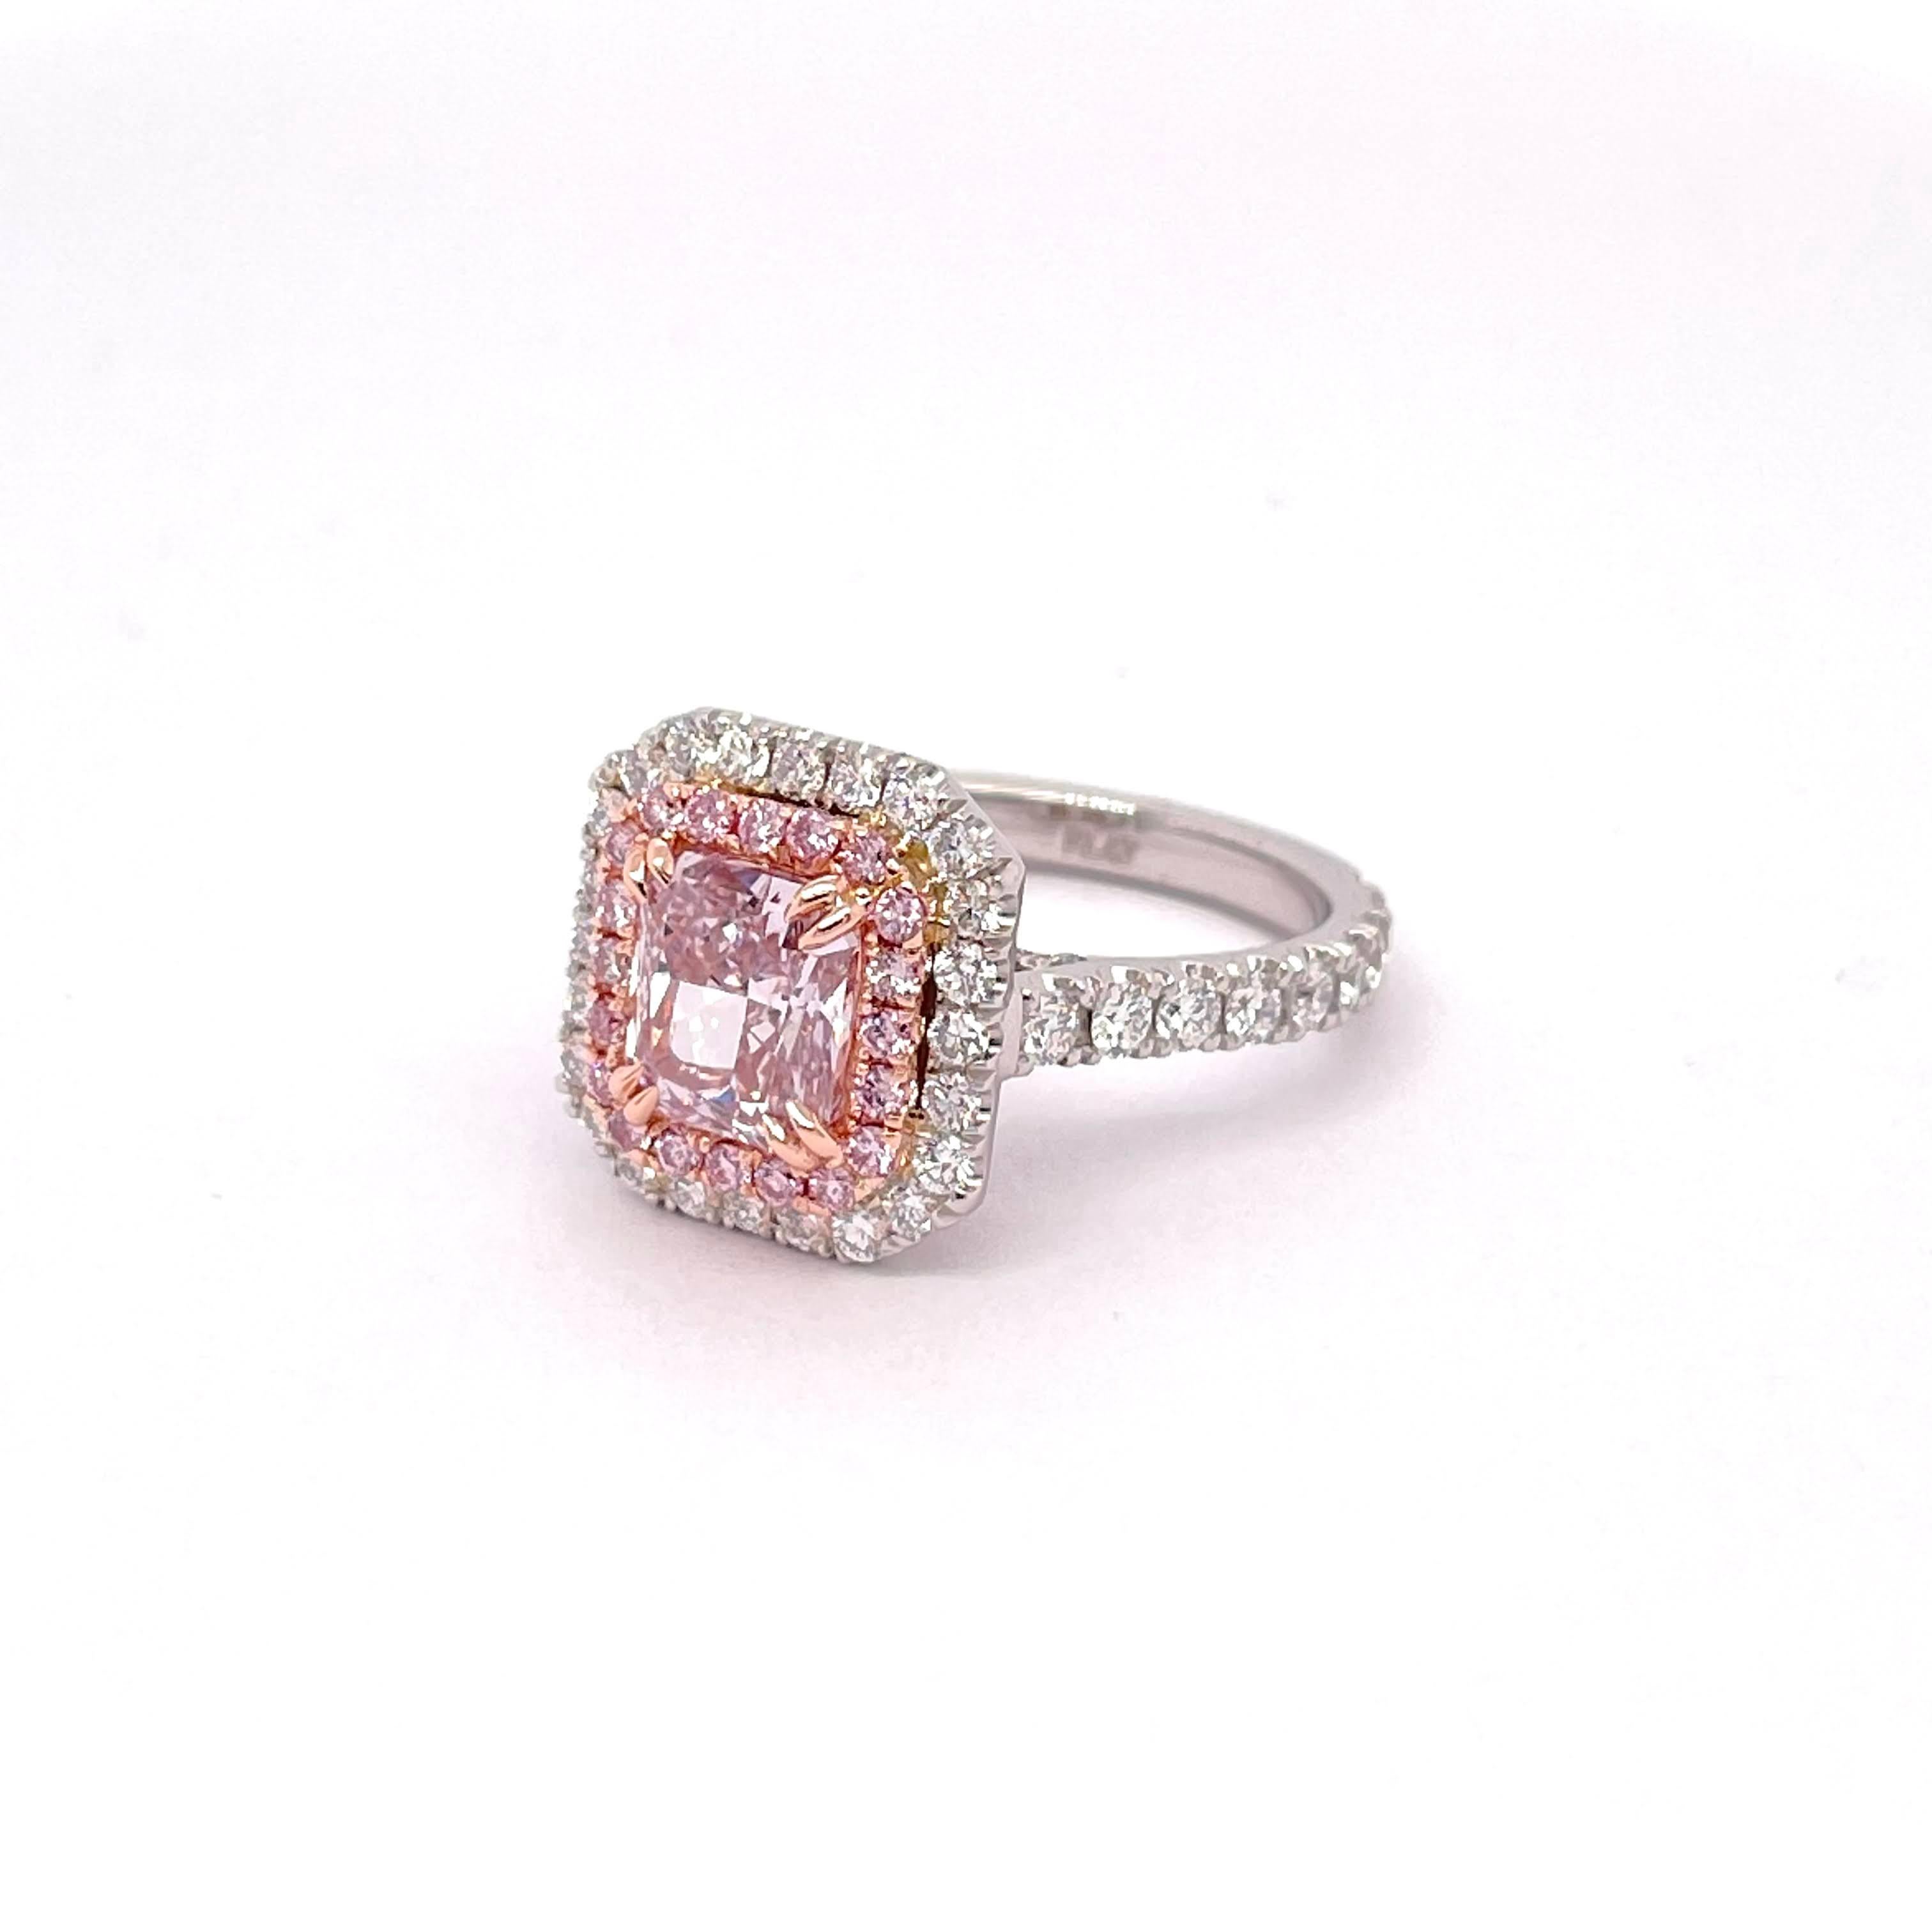 GIA Certified Radiant Shape Cut Diamond 1.74, Fancy Purplish Pink Color VS2 Clarity wrapping it with an inner halo made of 0.24 carats pink diamonds which give the beautiful illusion of a bigger center stone and an outer halo and shank made of 1.26